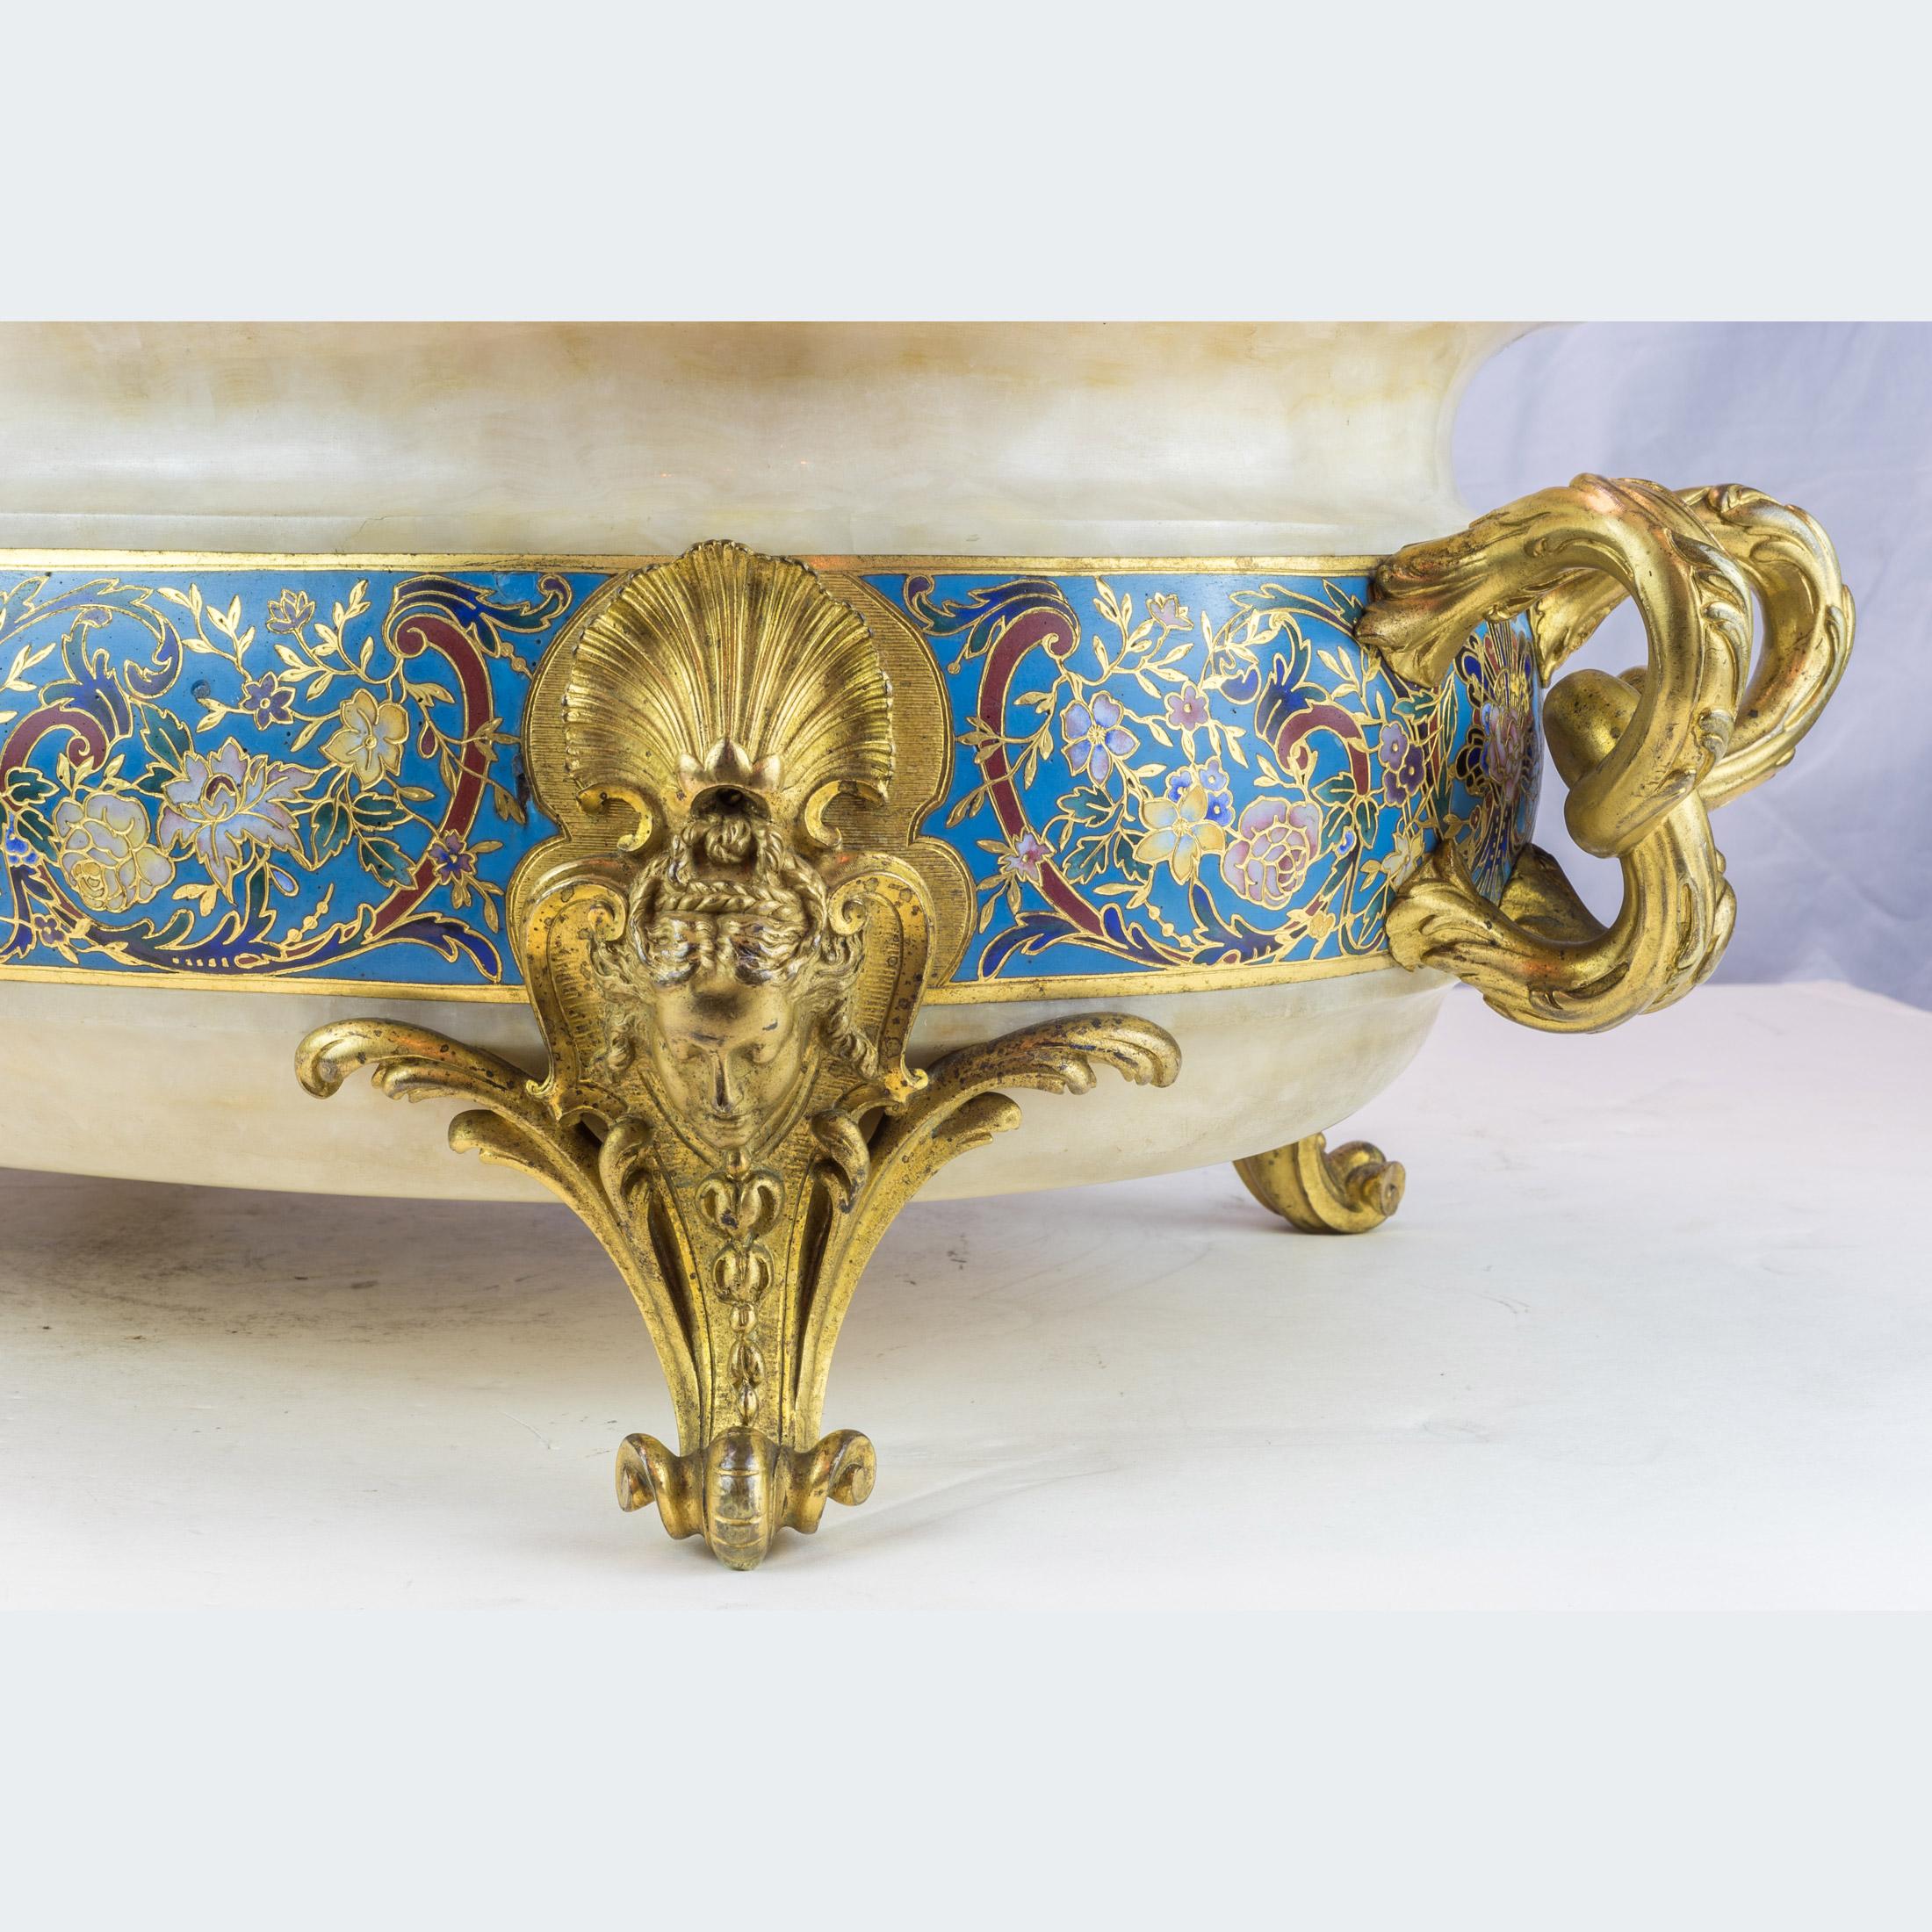 Bronze Ormolu-Mounted and Champlevé Enamel Decorated Onyx Jardinière by Barbedienne For Sale